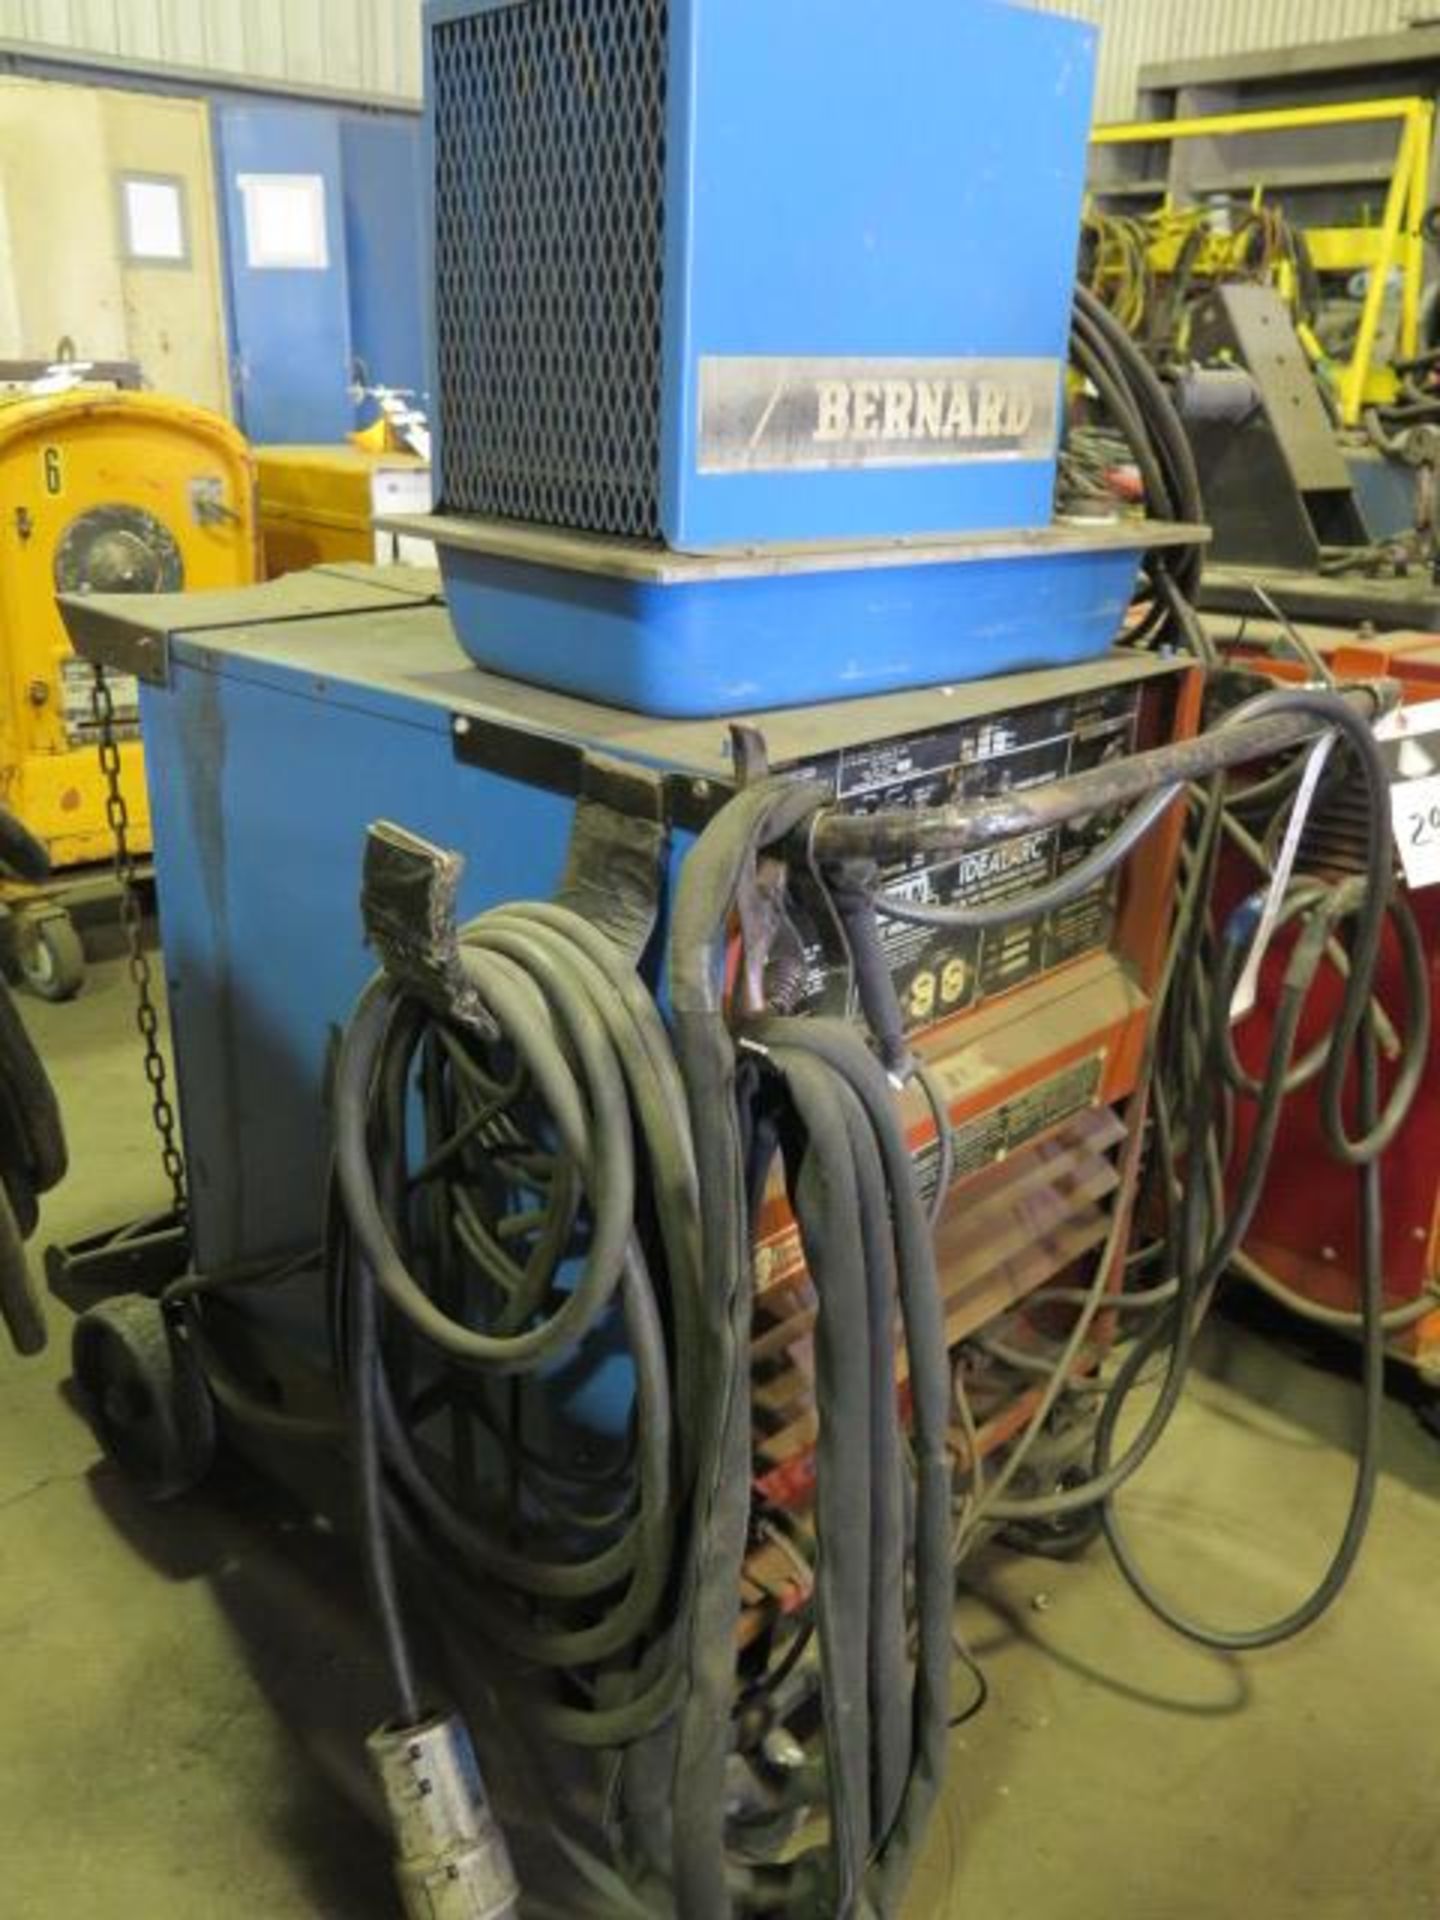 Lincoln Idealarc TIG 250/250 Arc Welding Power Source w/ Bernard Cooler (SOLD AS-IS - NO WARRANTY) - Image 2 of 10